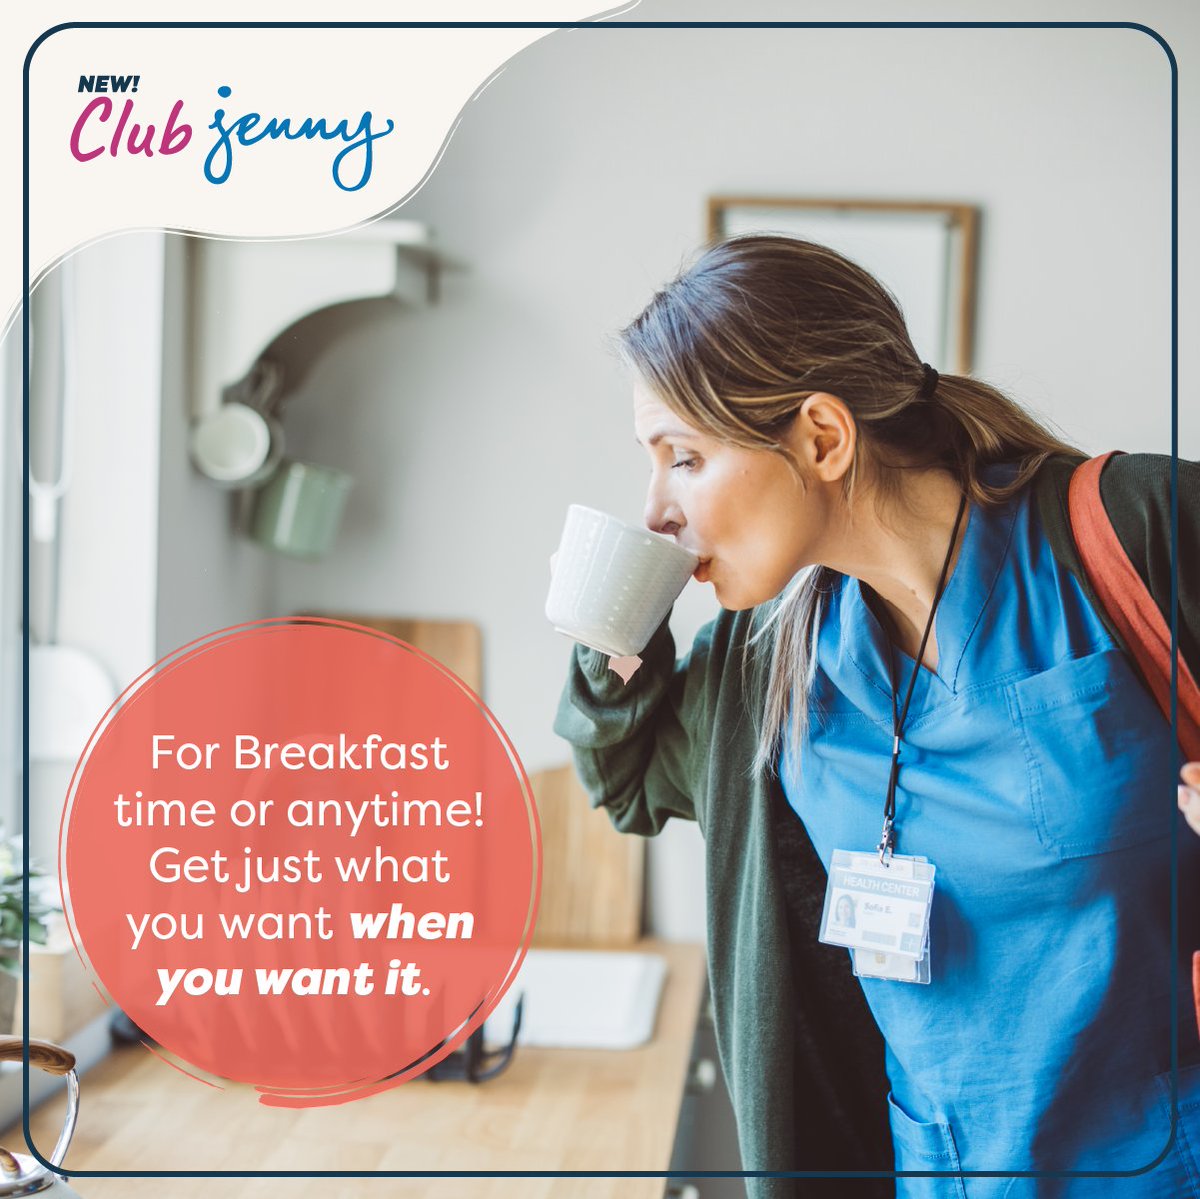 Balancing work, life, family, hobbies and more? Jenny’s got your back. 💙 Club Jenny offers the tools & support to succeed, with the convenience to complement your schedule. So you never have to add more stress to your plate! 🍽️